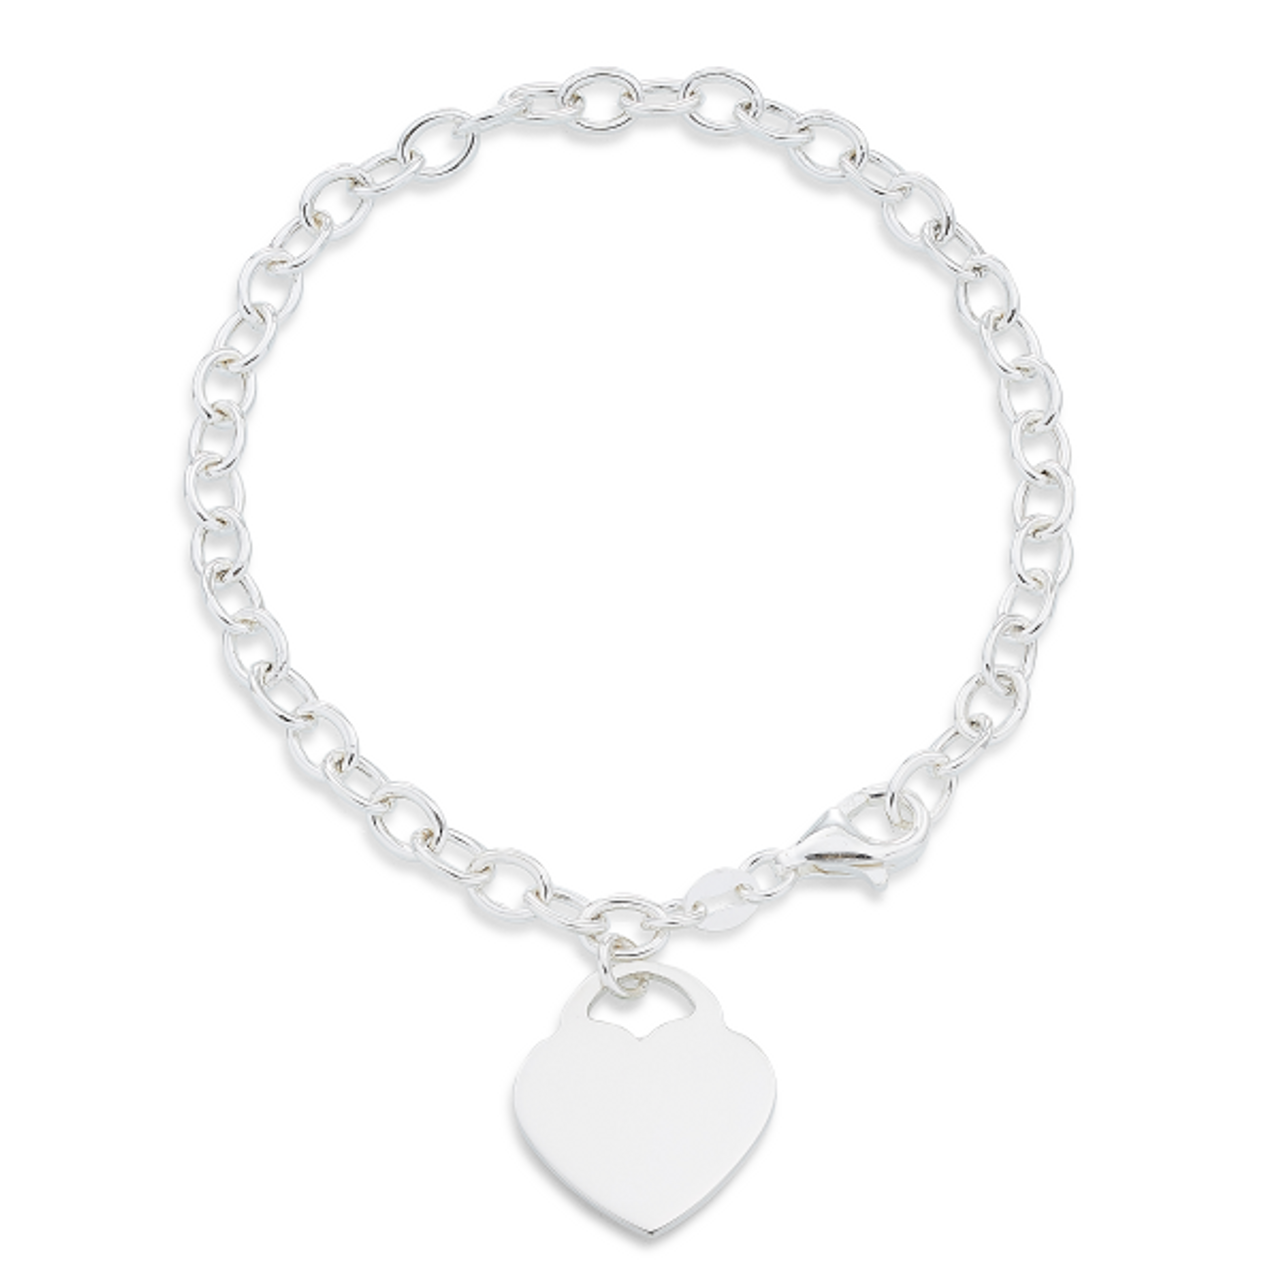 Sterling Silver Chain Link Necklace and Bracelet with Heart Charms